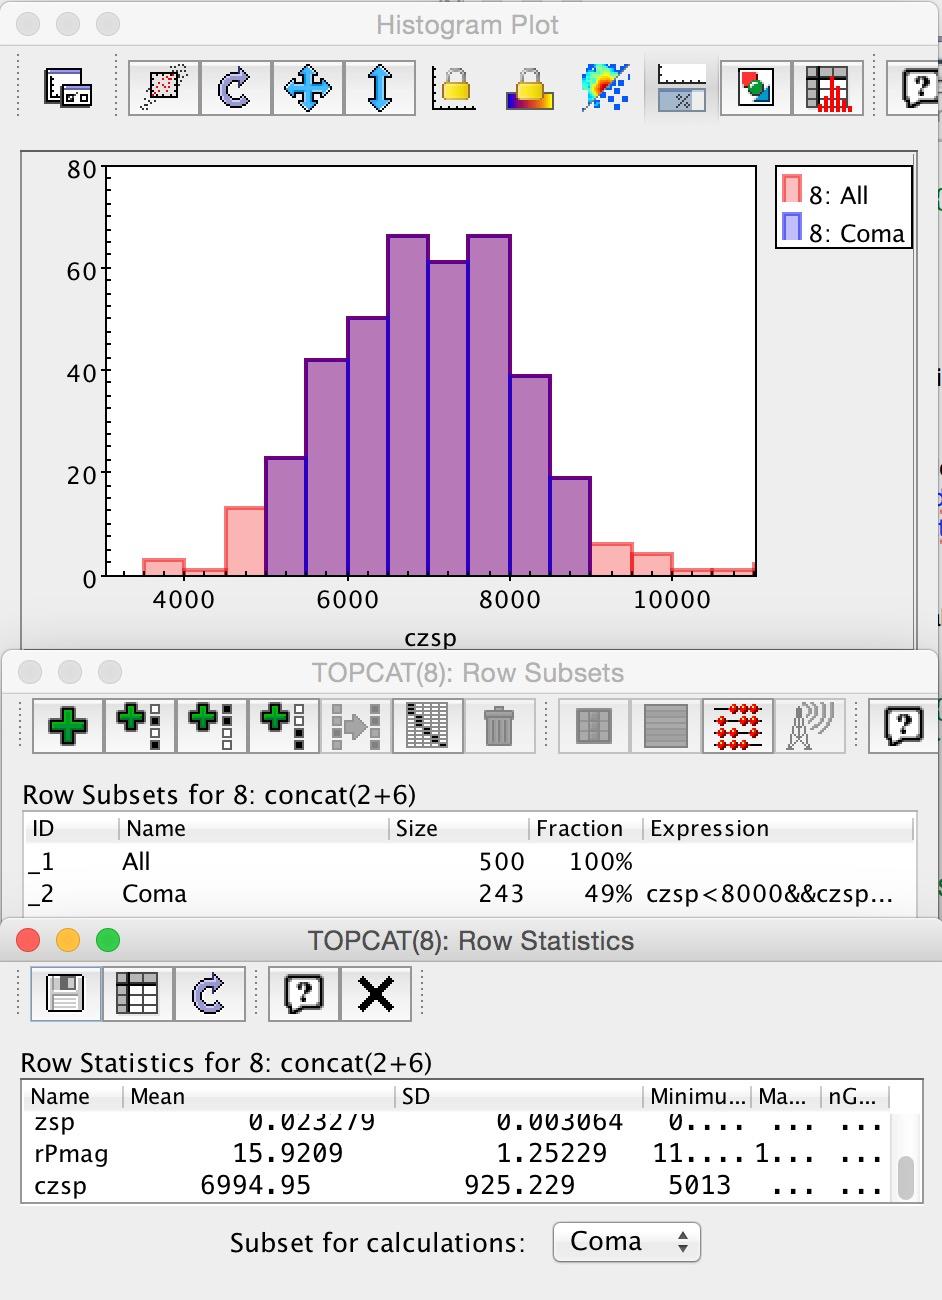 Select this Coma subset in the main window of TOPCAT and open the Row Statistics window.